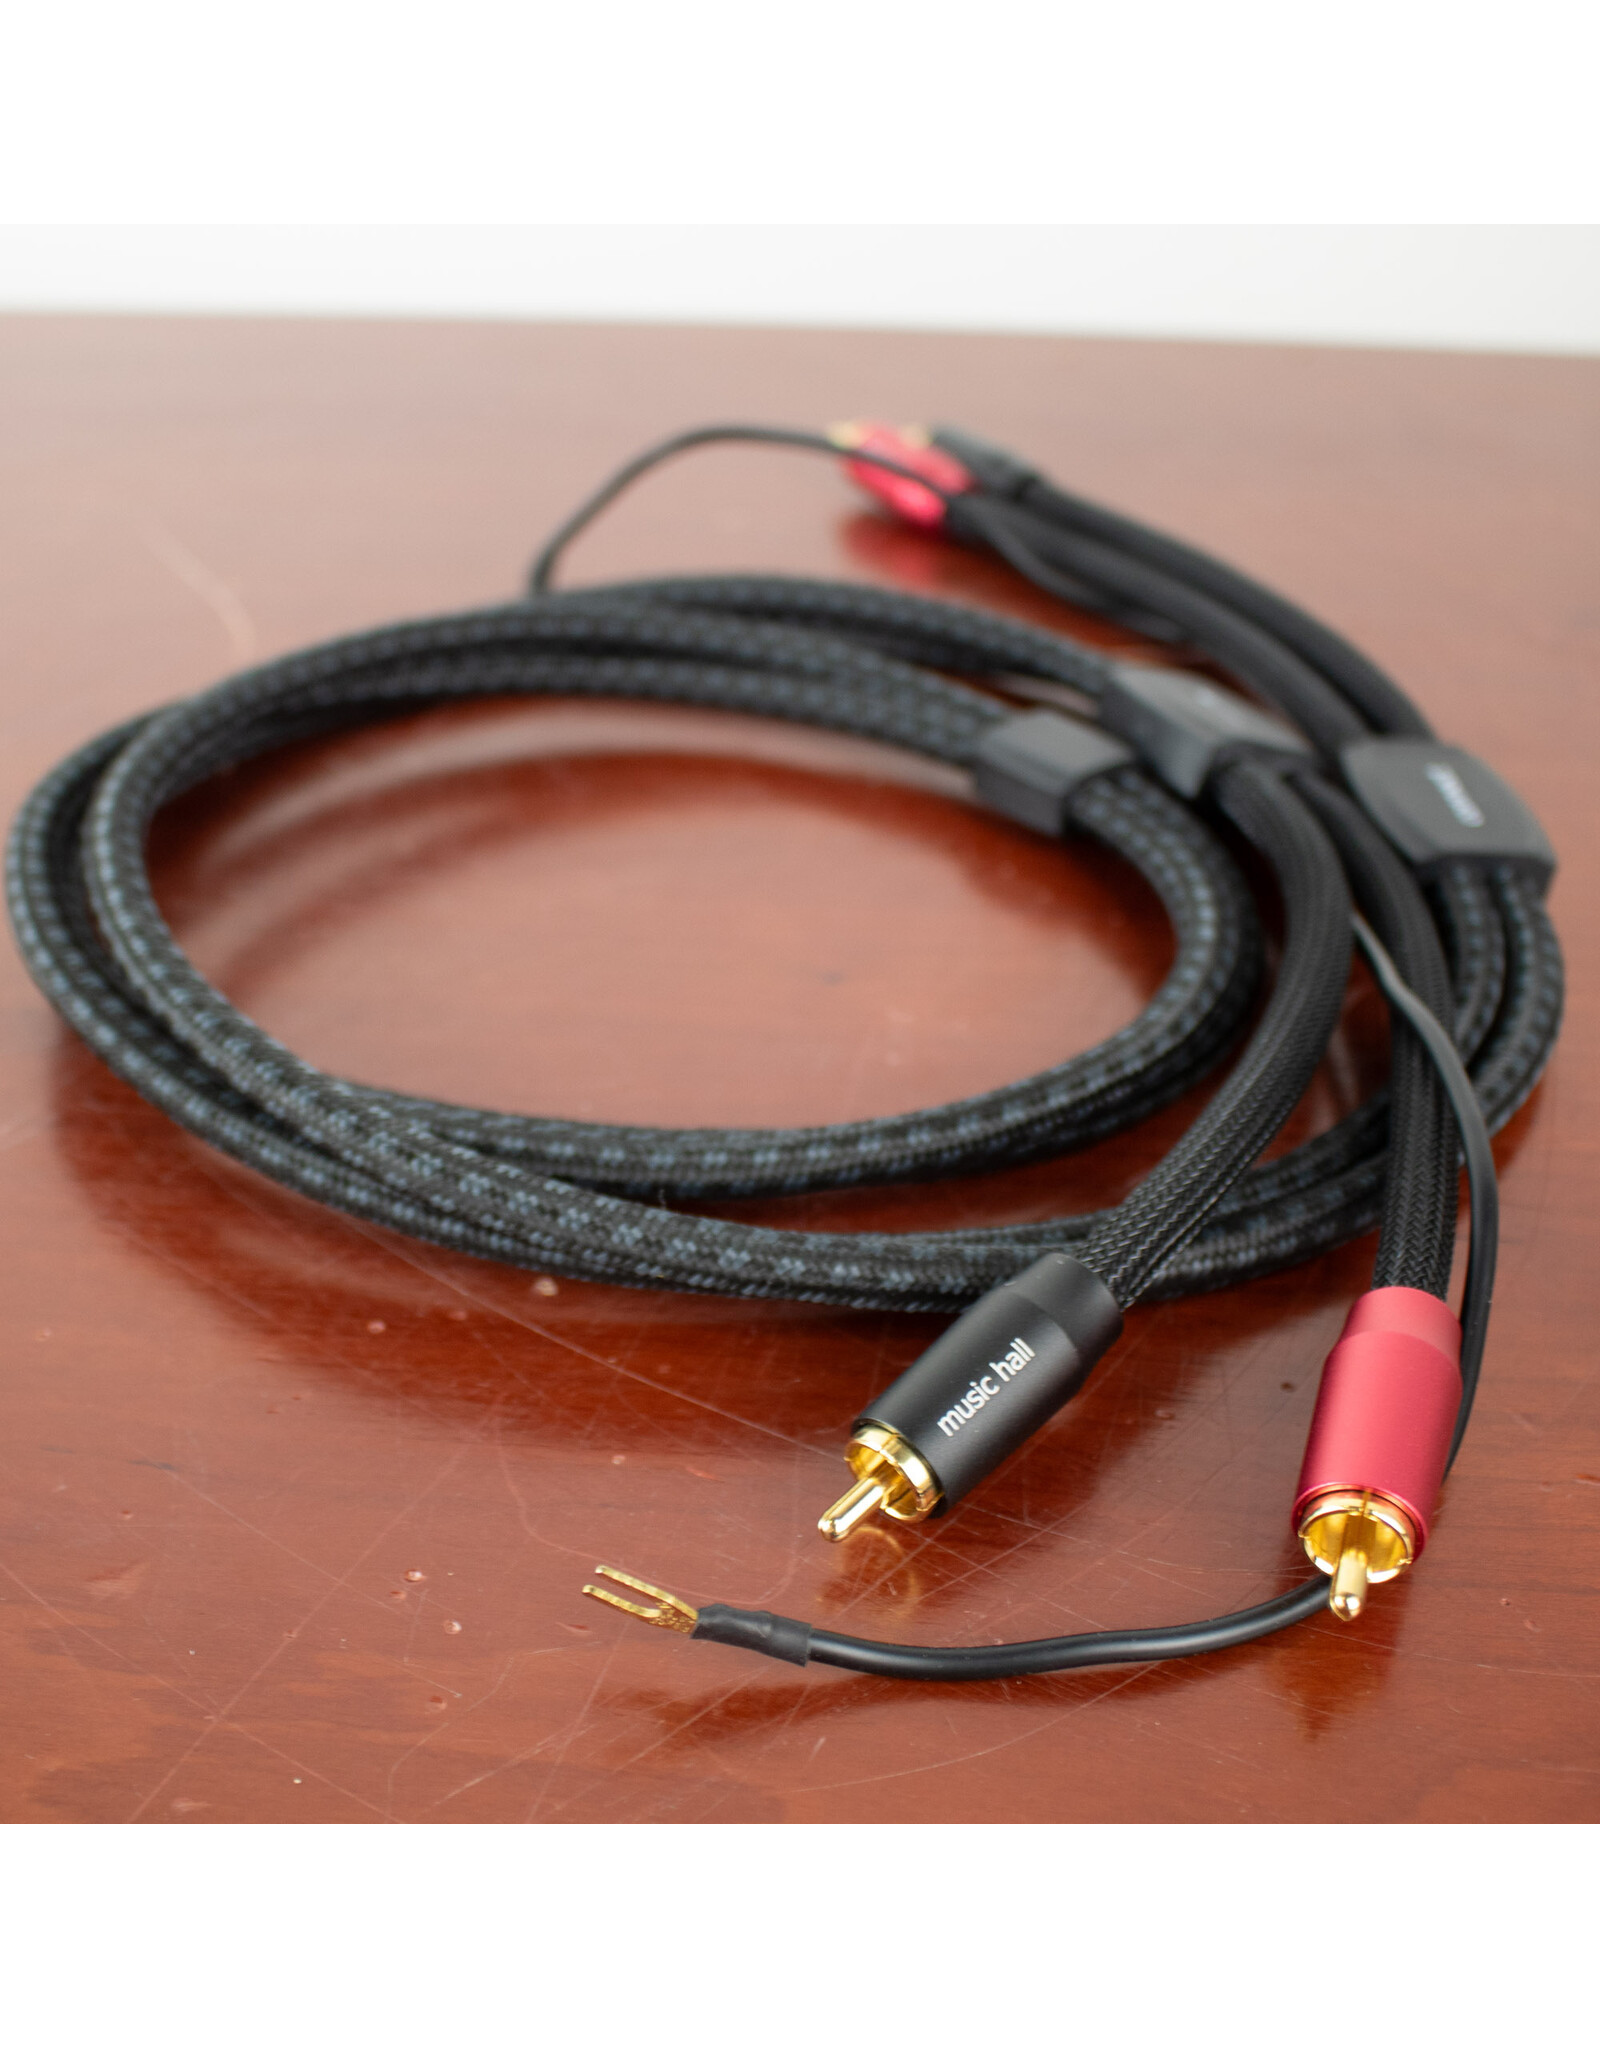 Music Hall Music Hall Connect Phono RCA Cable USED